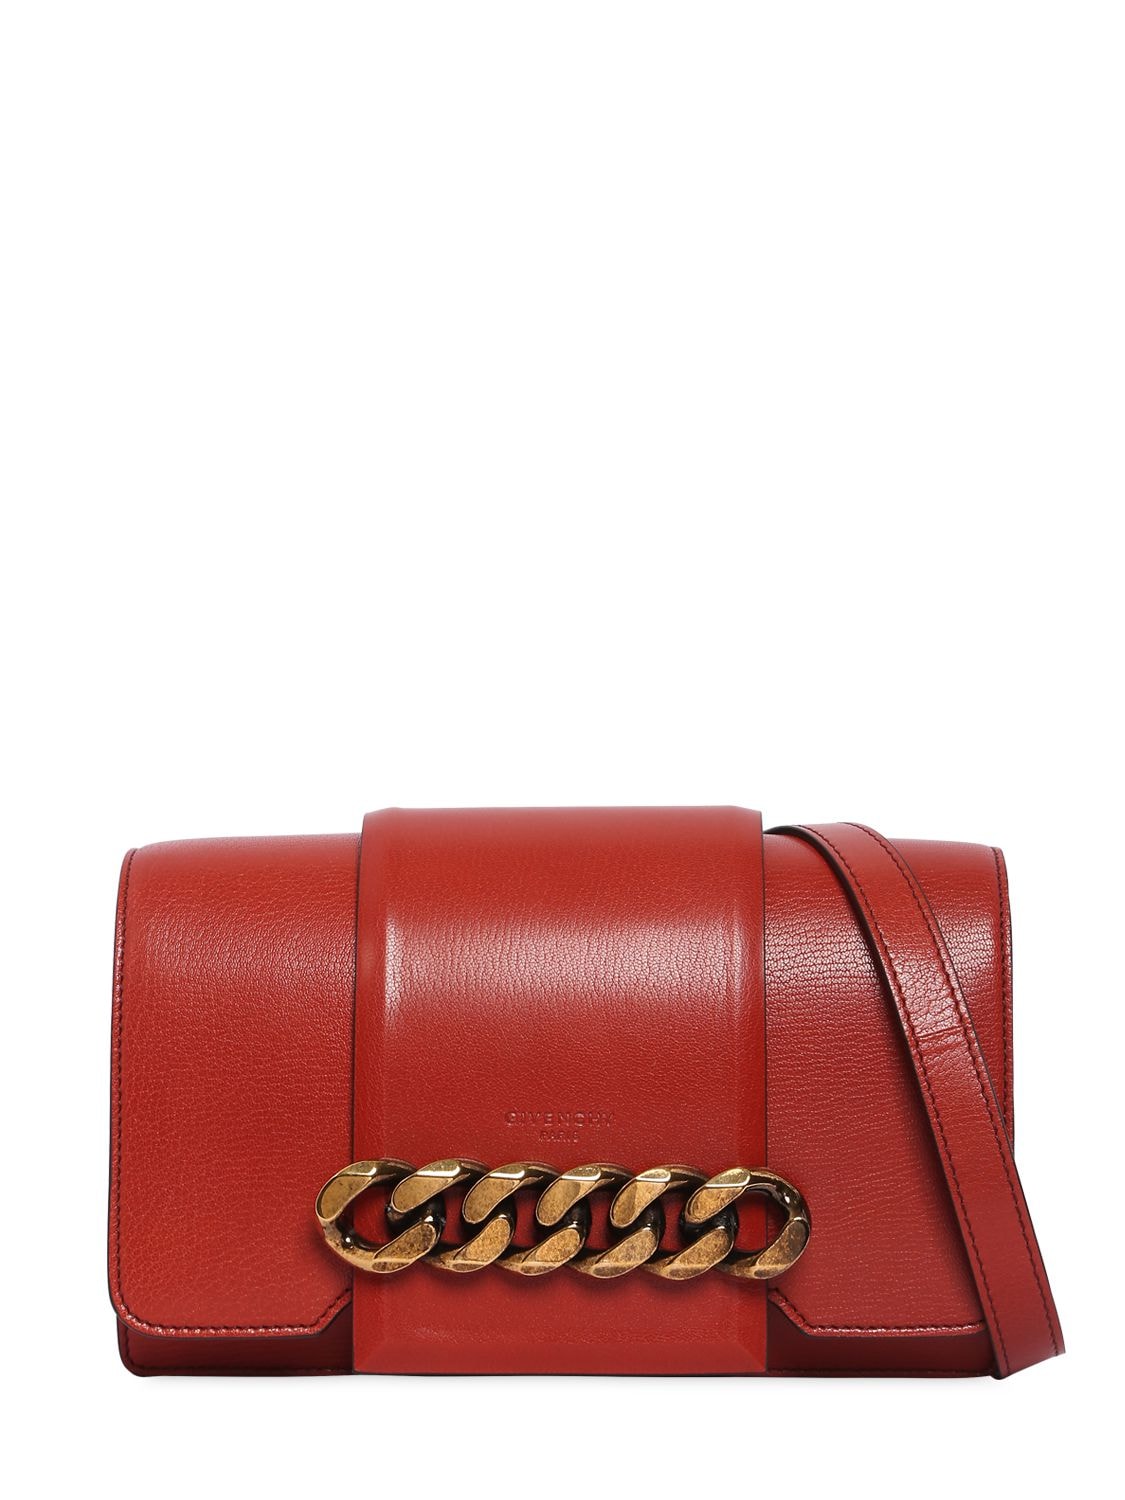 Givenchy Small Infinity Leather Shoulder Bag In Dark Red